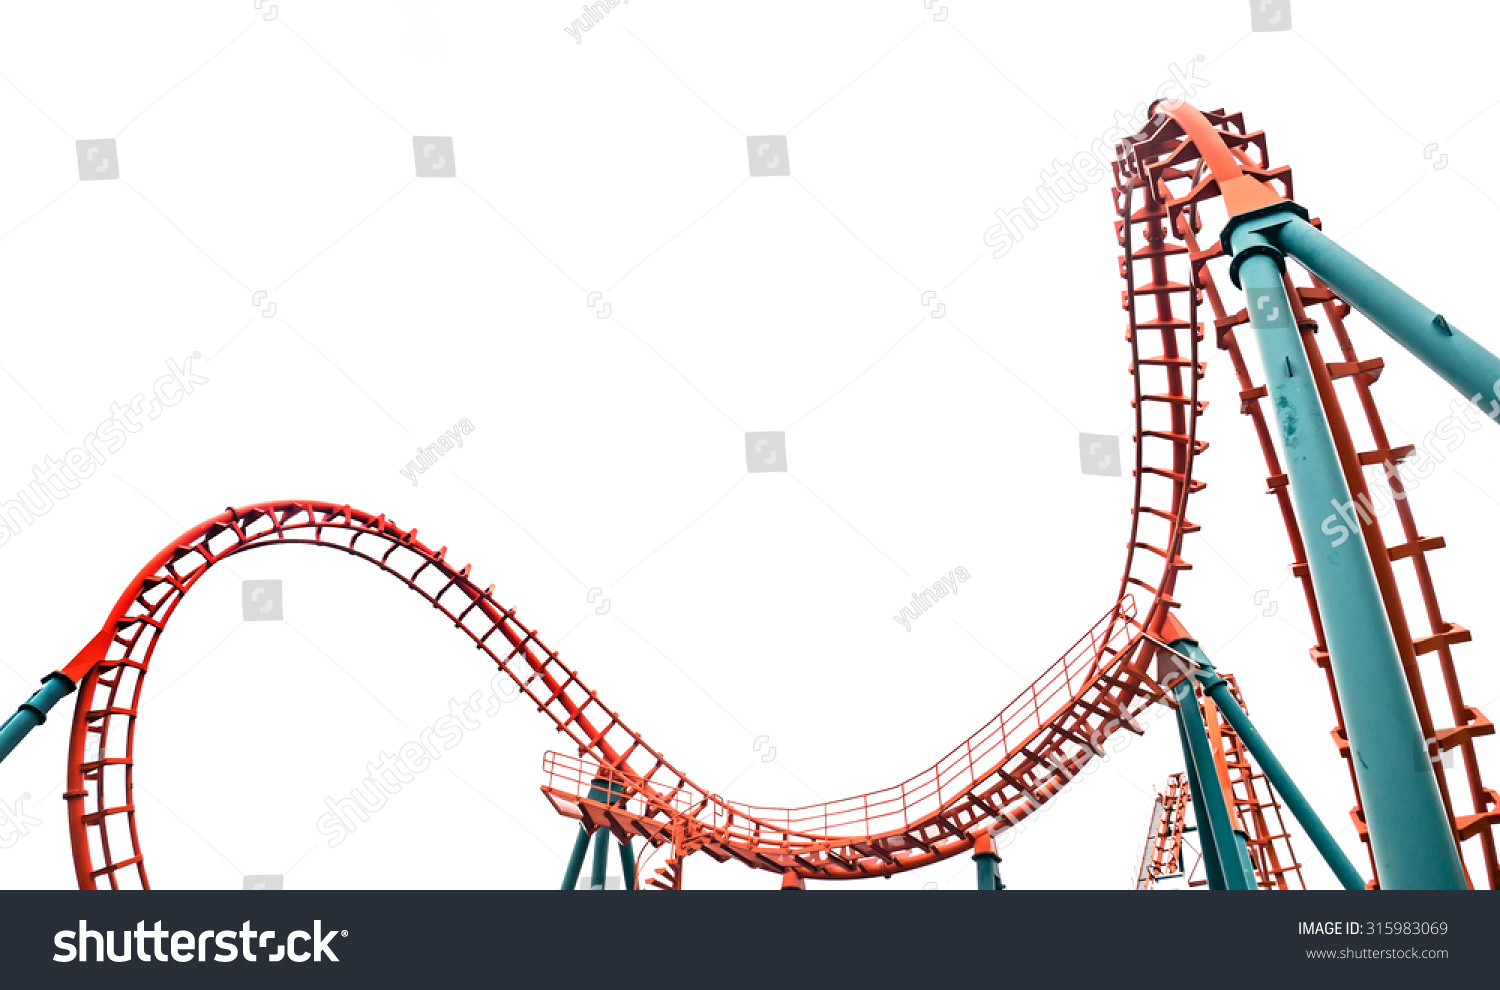 Roller coaster isolated on white background #315983069